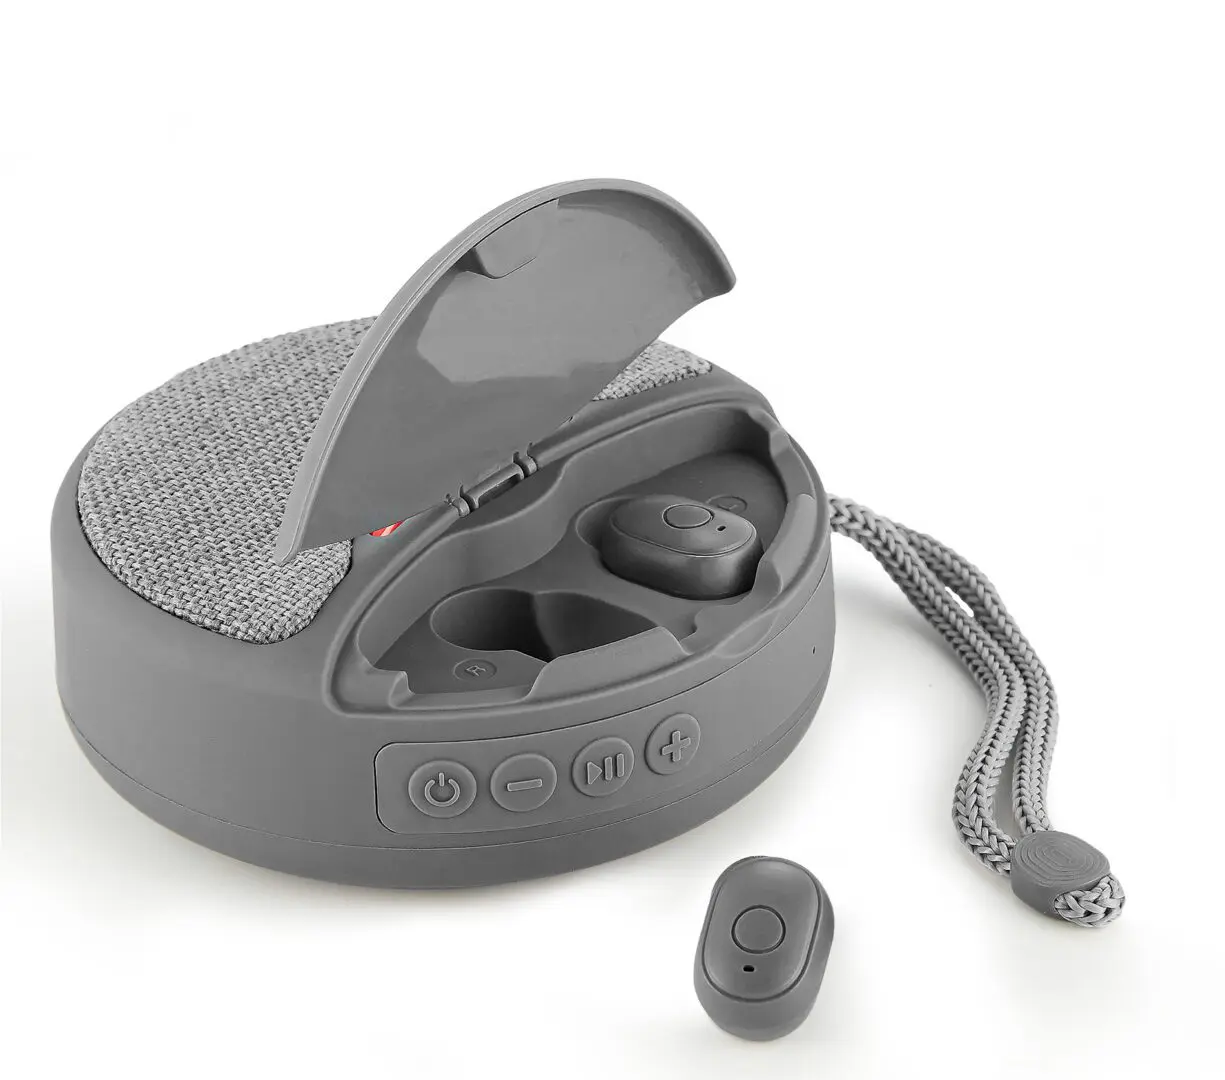 A gray wireless earbud set with one earbud next to an open charging case, featuring a fabric texture and a wrist strap.